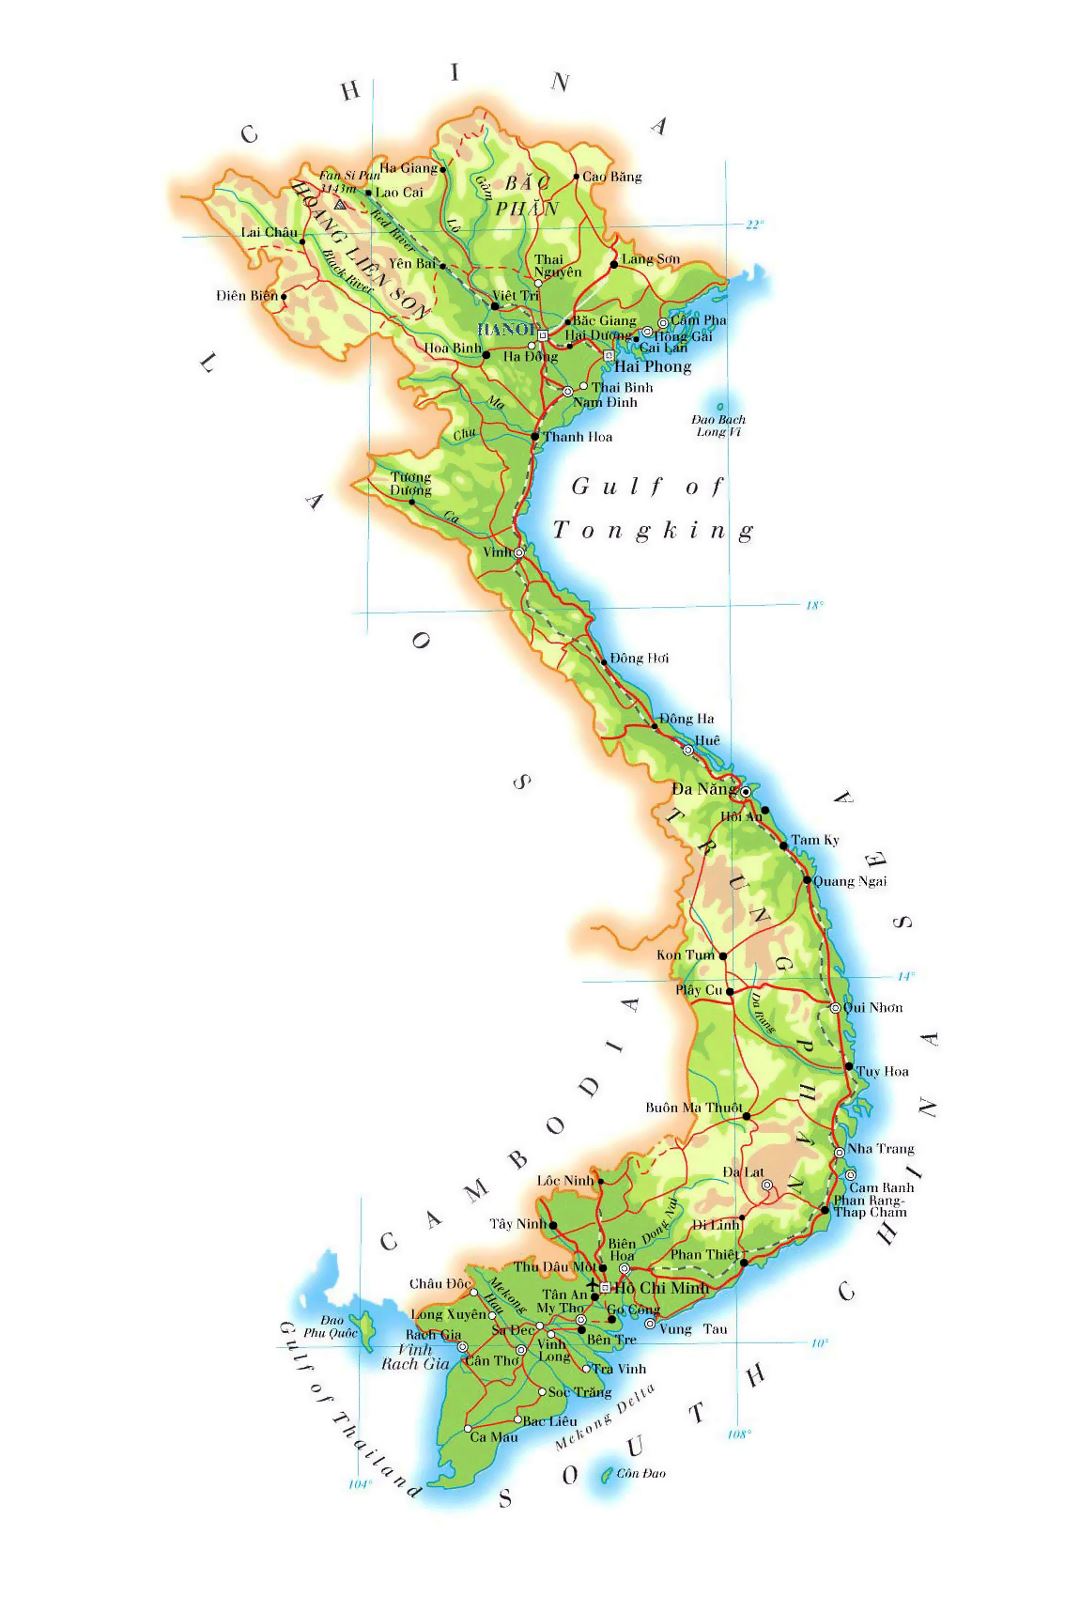 Large elevation map of Vietnam with roads, railroads, major cities and airports